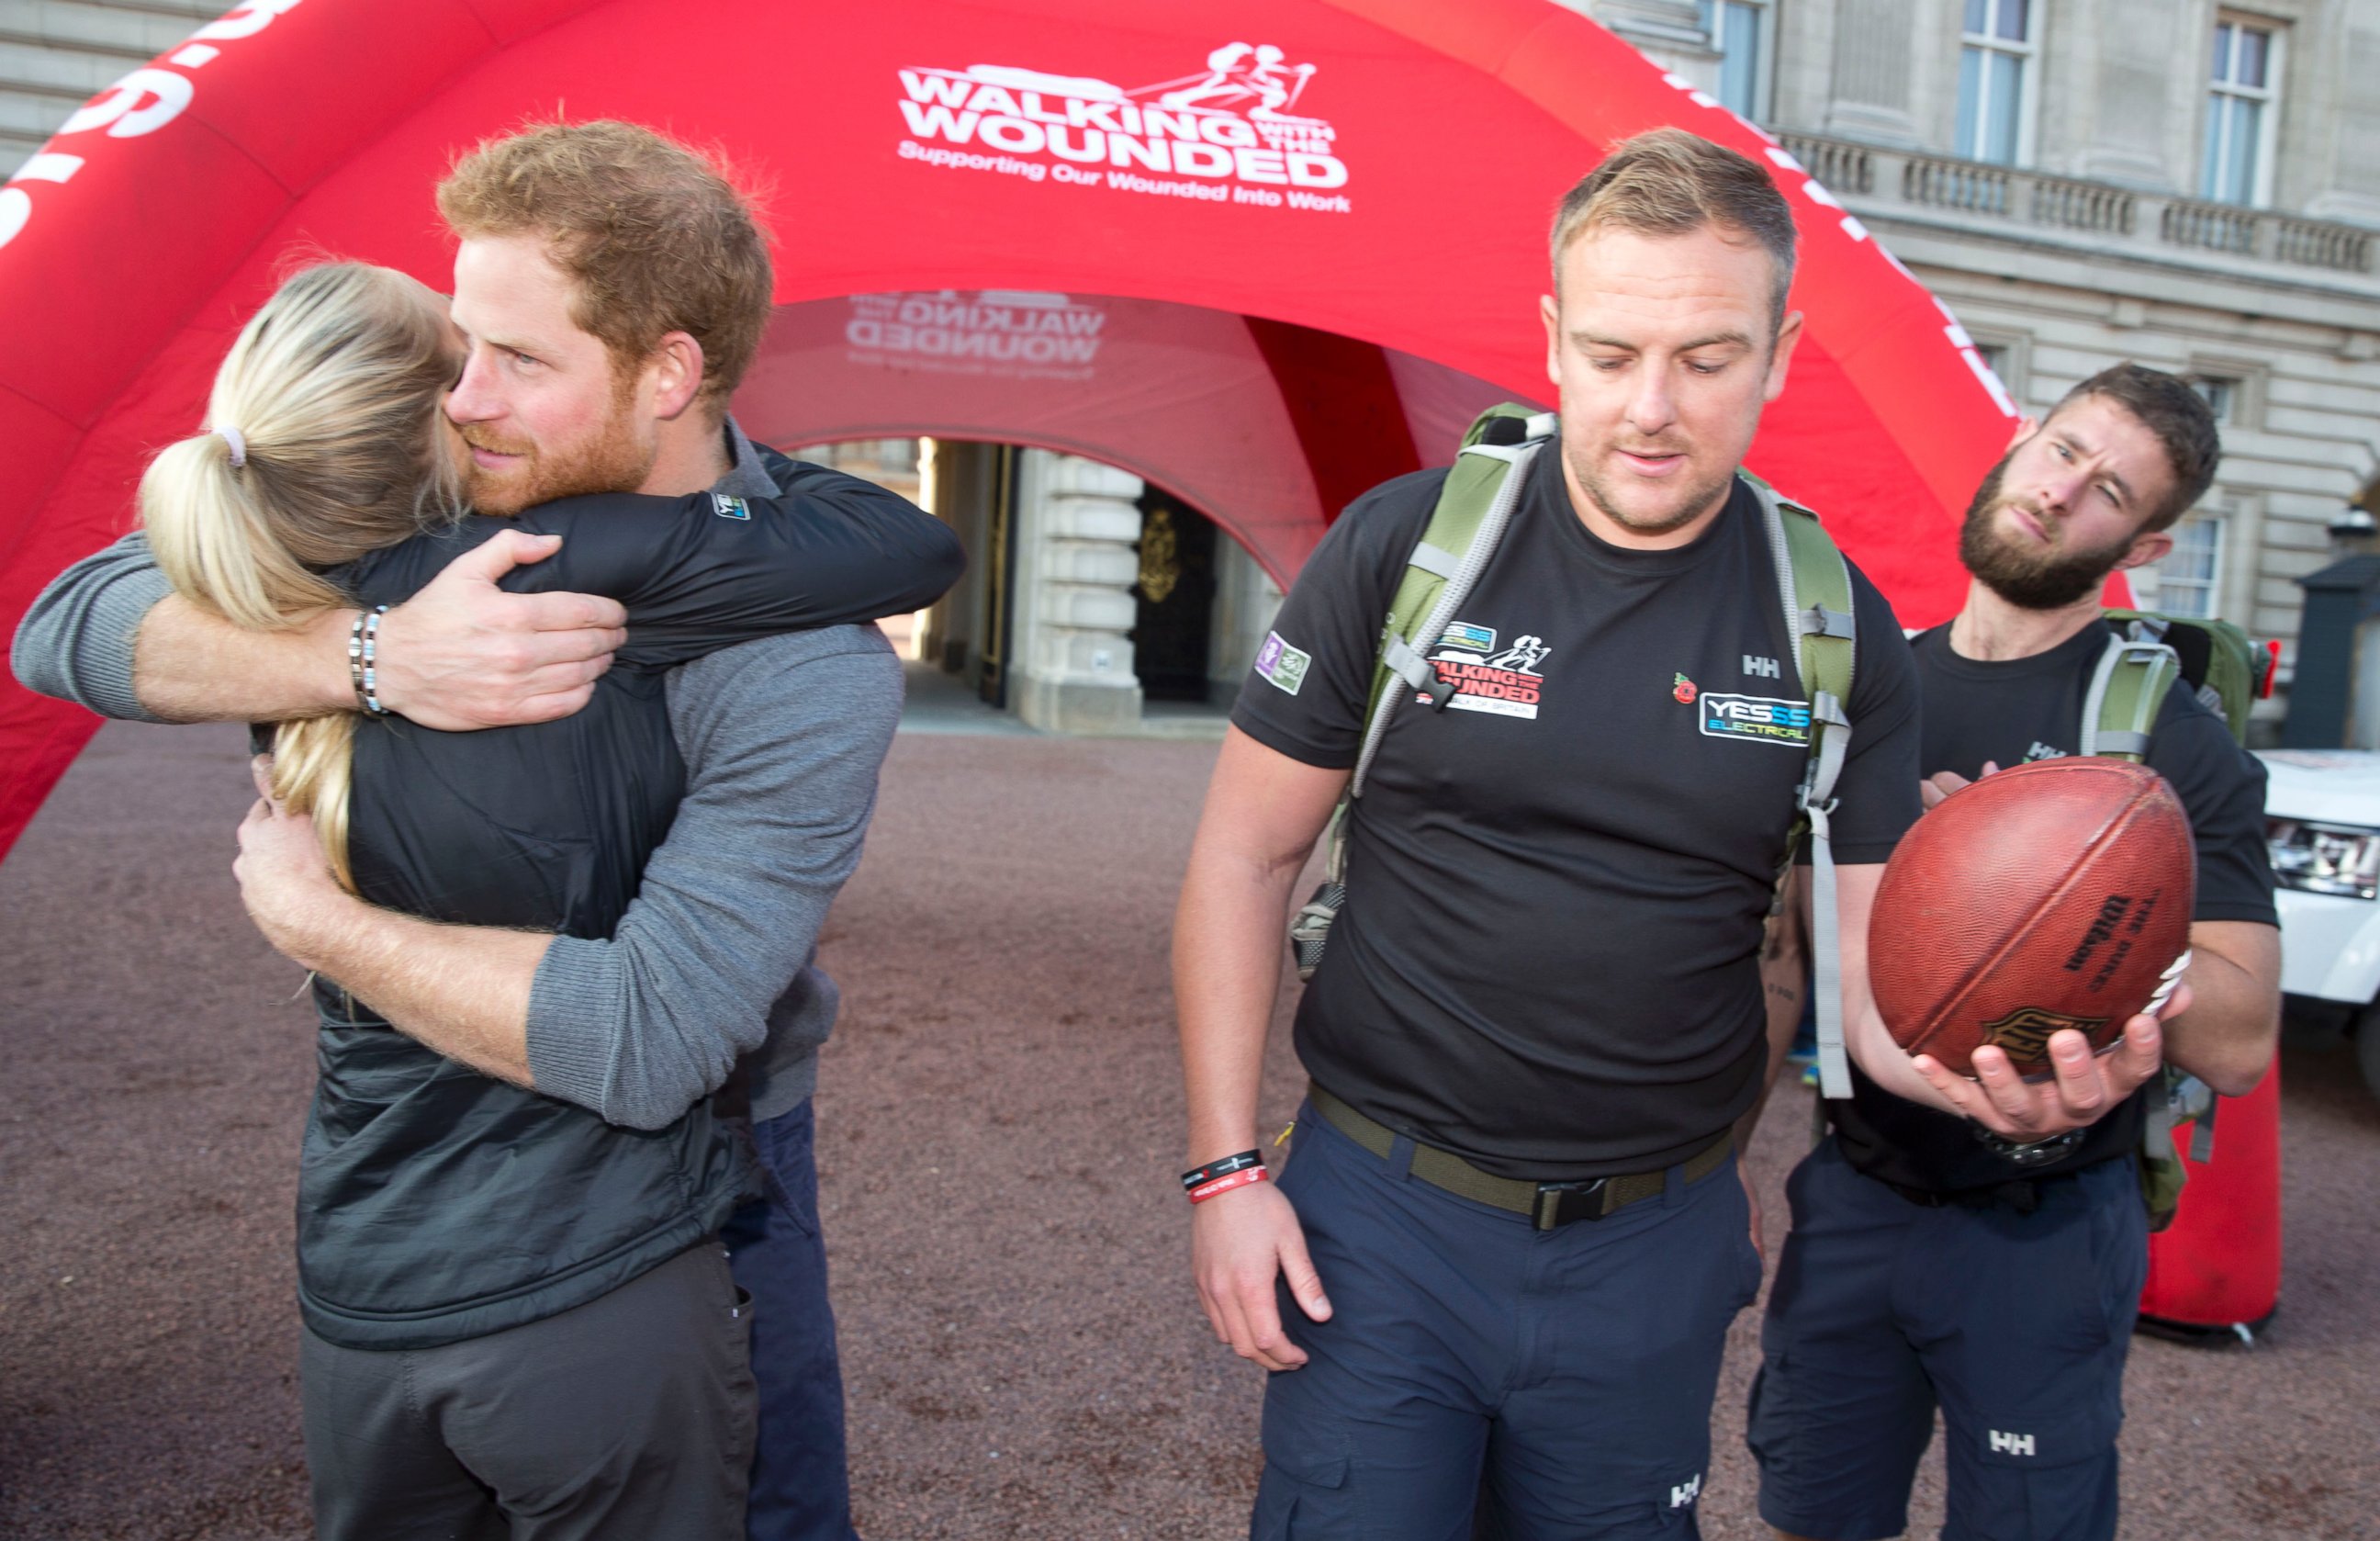 PHOTO: Prince Harry hugs Kirsty Ennis, a helicopter door gunner and Afghan veteran as he meets with members of the Walking With The Wounded team at Buckingham Palace, Nov. 1, 2015 in London.